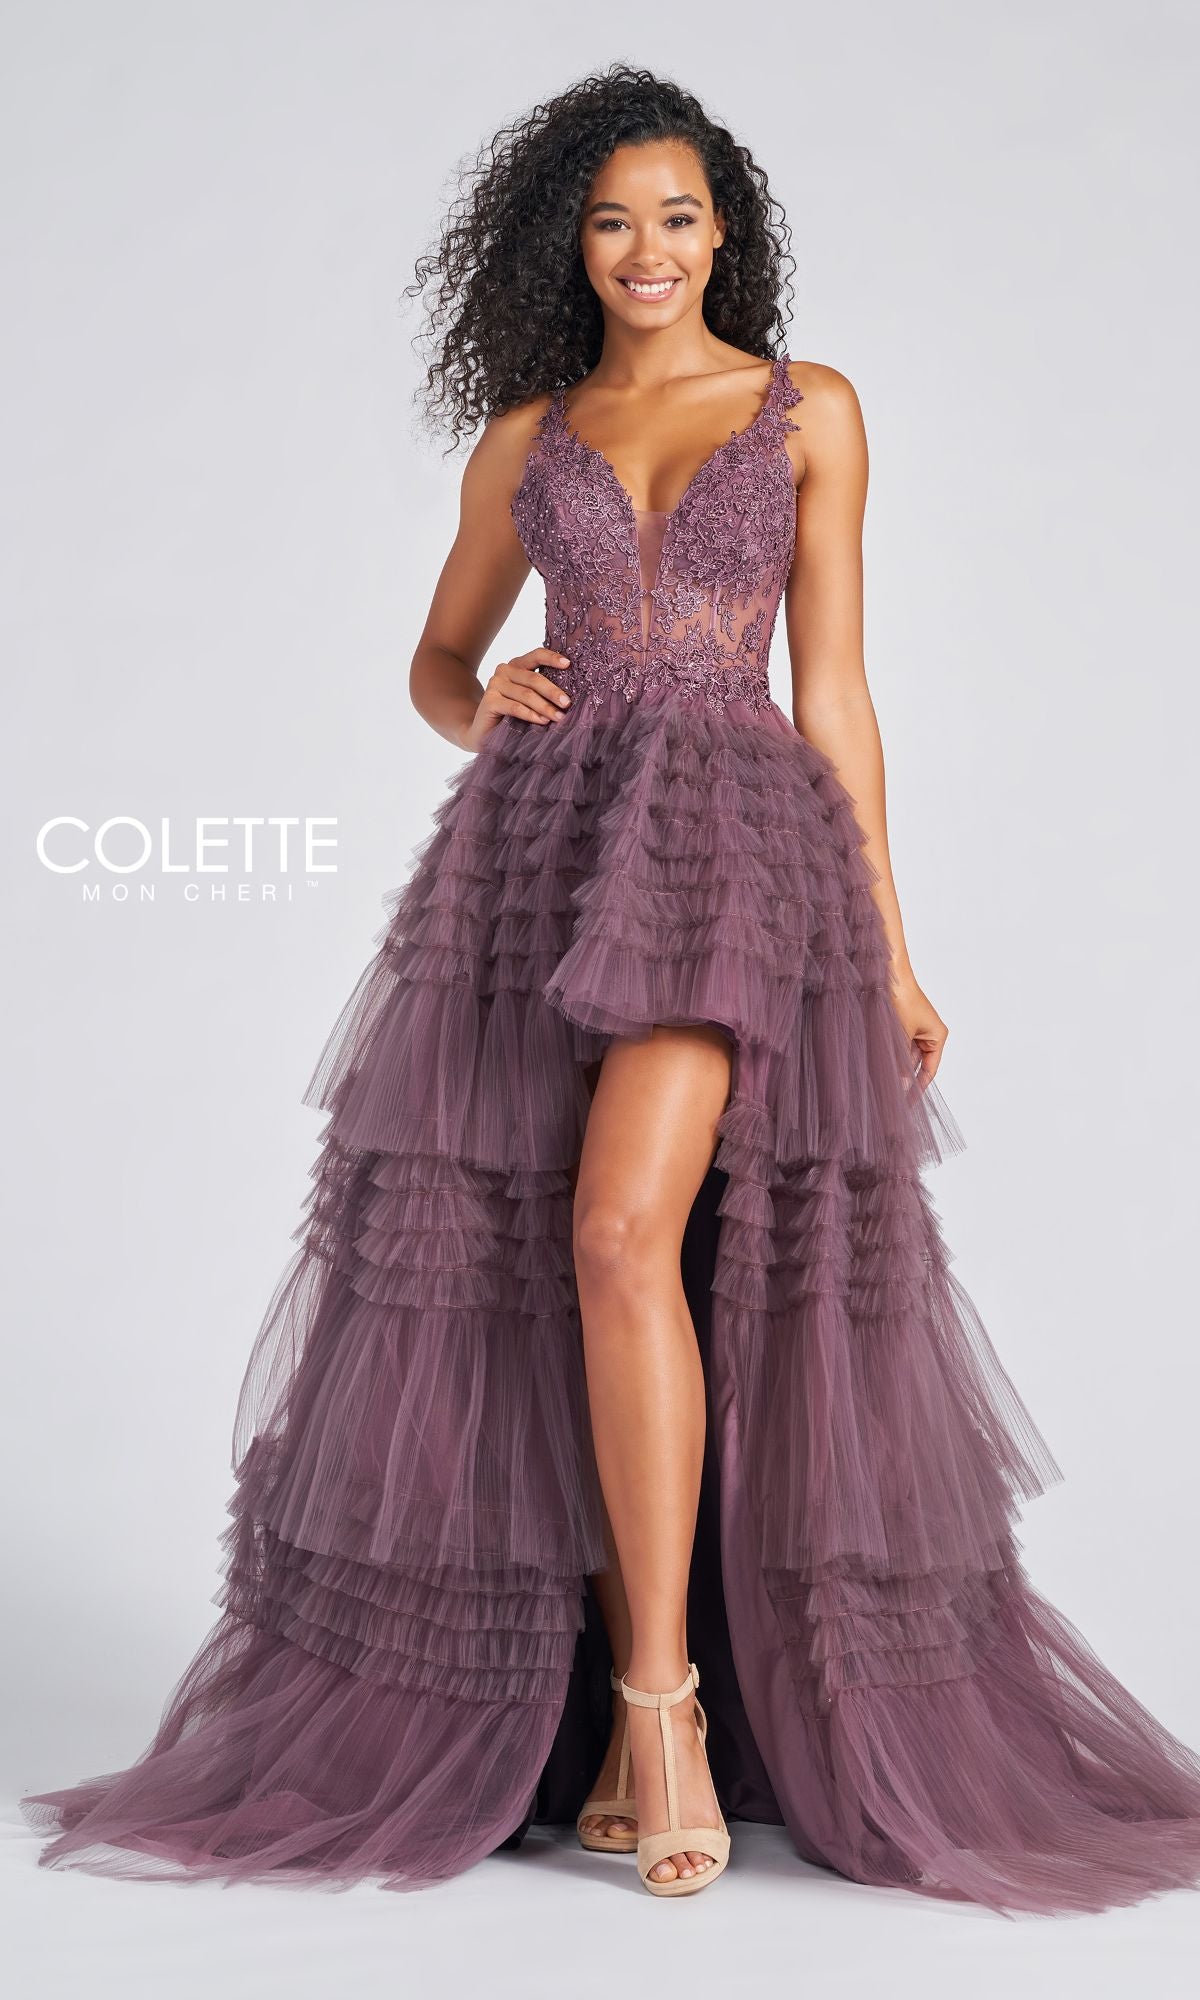 tiered tulle dress